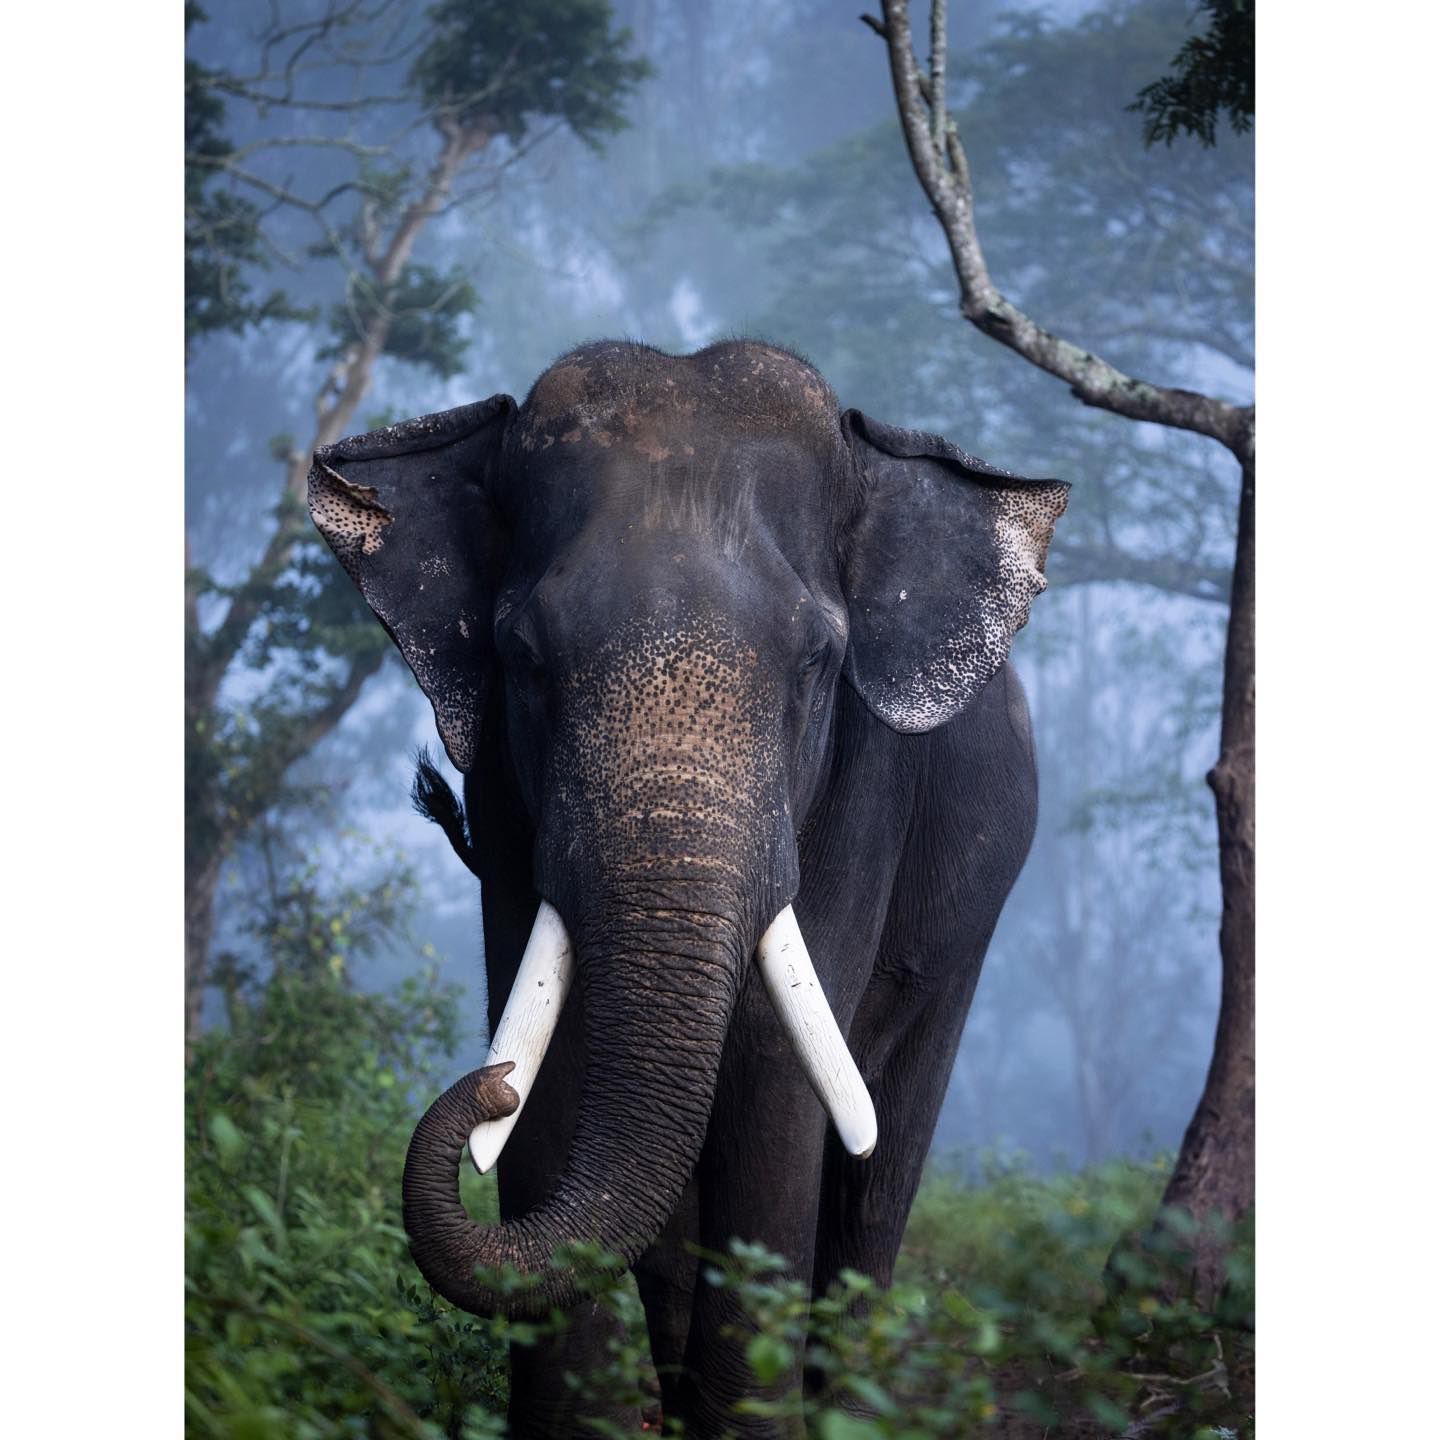 One of the top publications of @brentstirton which has 2.3K likes and 28 comments